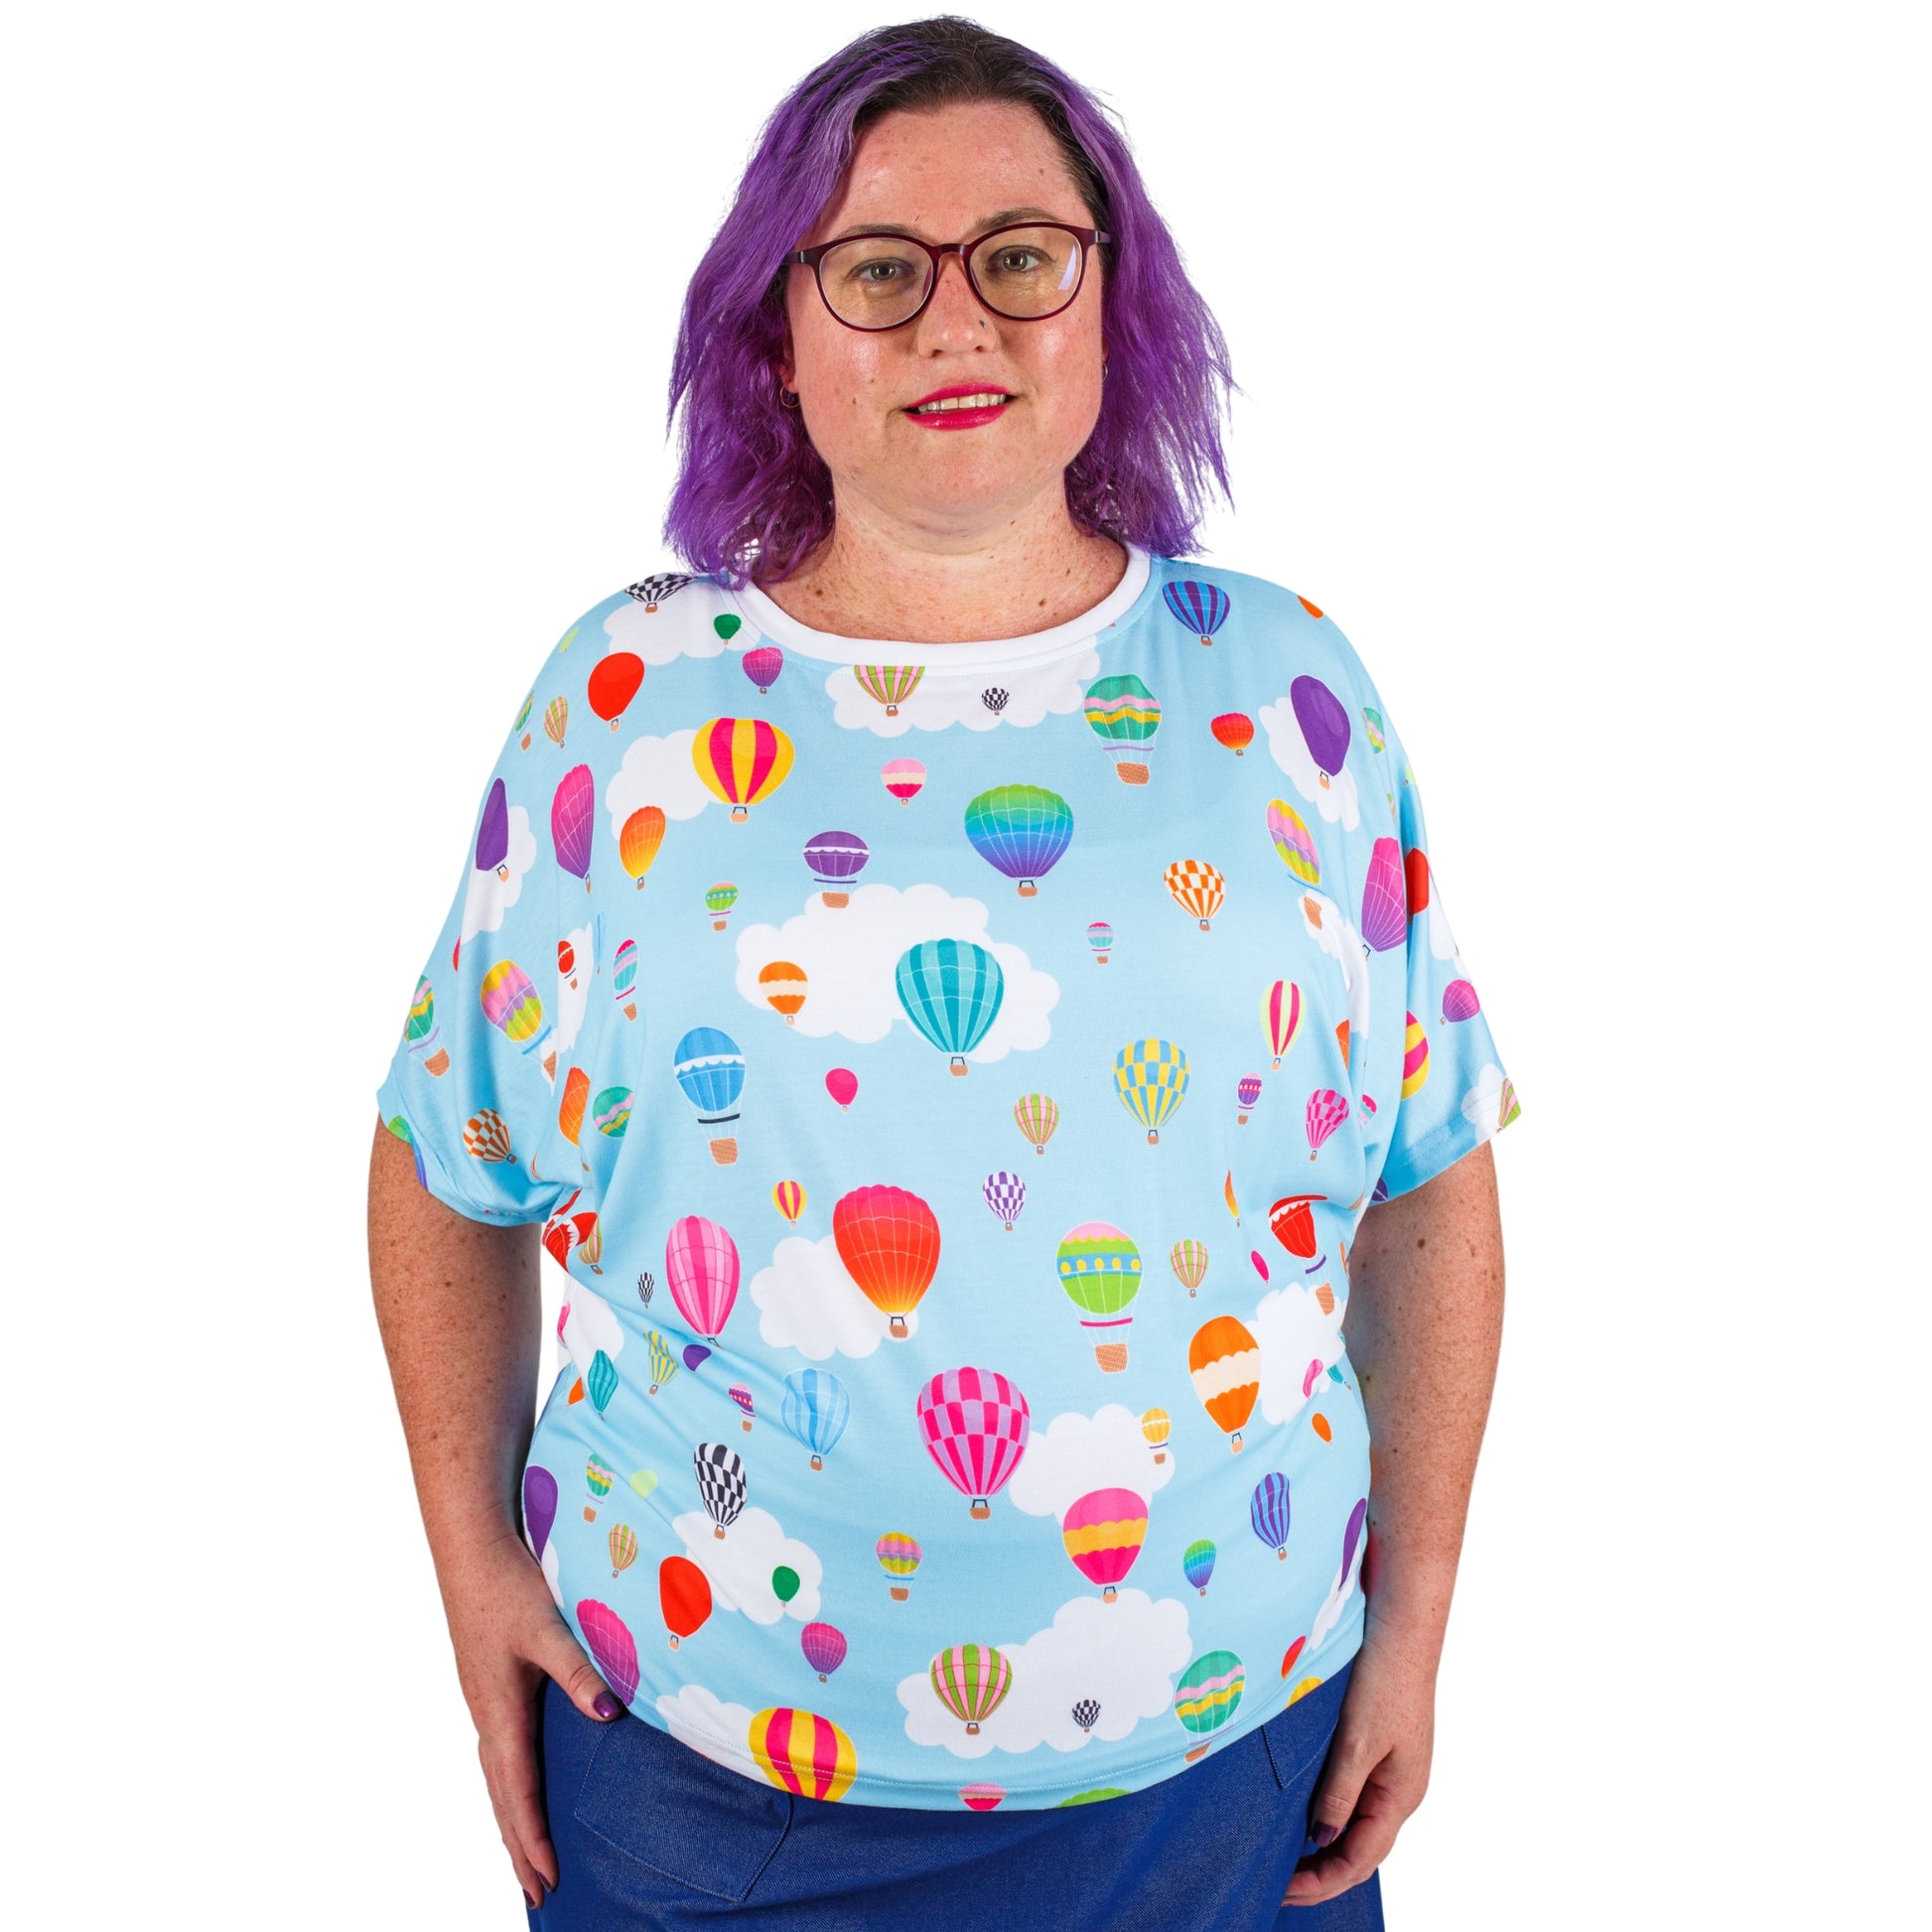 Whimsy Batwing Top by RainbowsAndFairies.com.au (Balloons - Hot Air Balloon - Knit Top - Vintage Inspired - Retro Shirt - Kitsch) - SKU: CL_BATOP_WHIMS_RBW - Pic-02